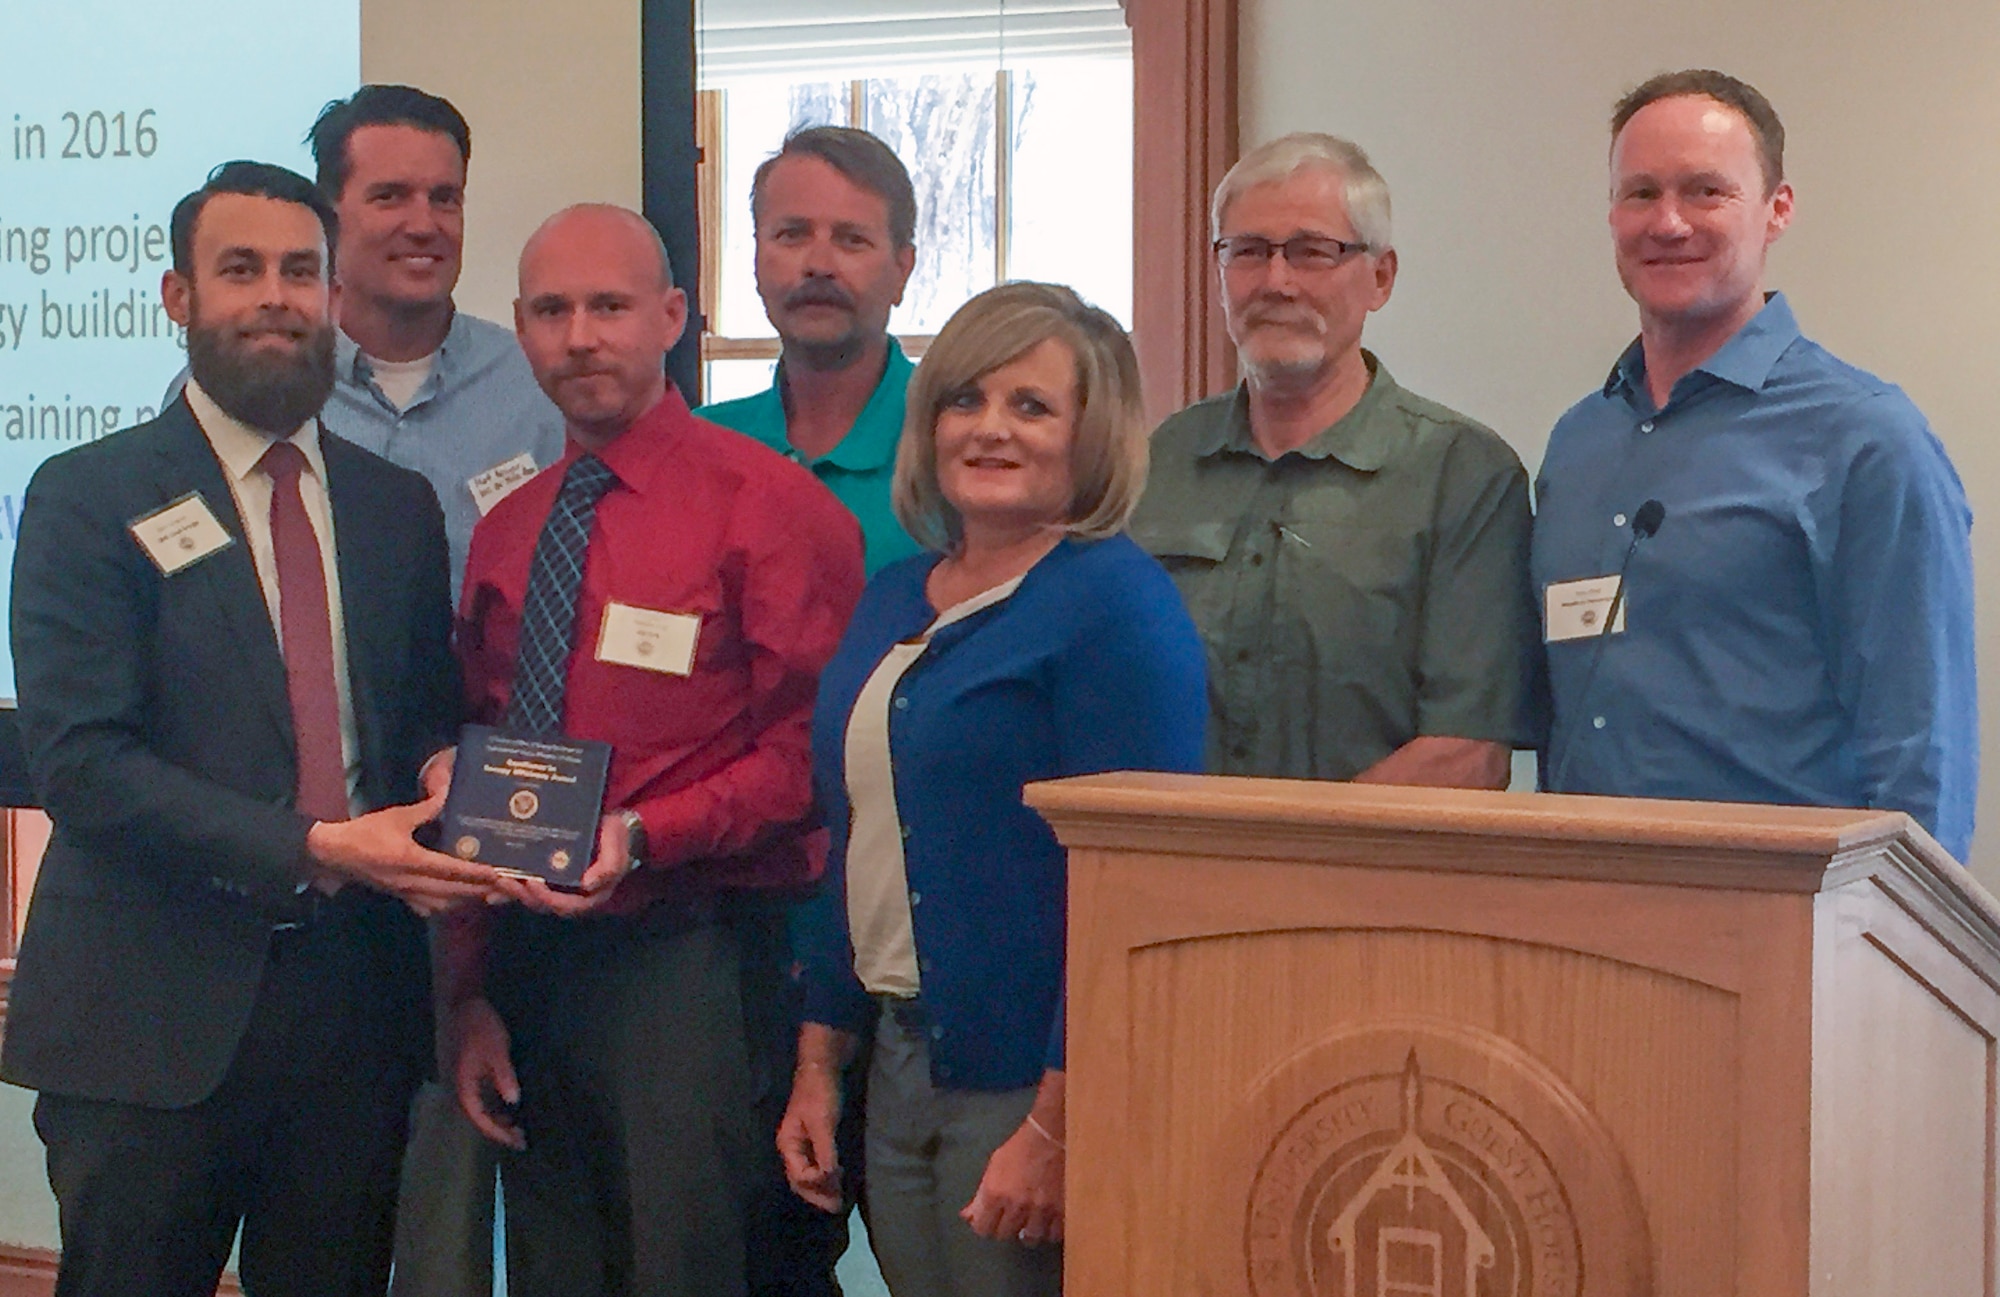 The Hill Energy Management Office accepts an award as part of the Utah Industrial Energy Efficiency Challenge. Front row from the left are Kevin Emerson, Nickolas King, and Karen Bastian. Second row from the left are Matthew Meyer, Mark Persico, Larry Hamberg, and Brian Walsh. (Courtesy photo)